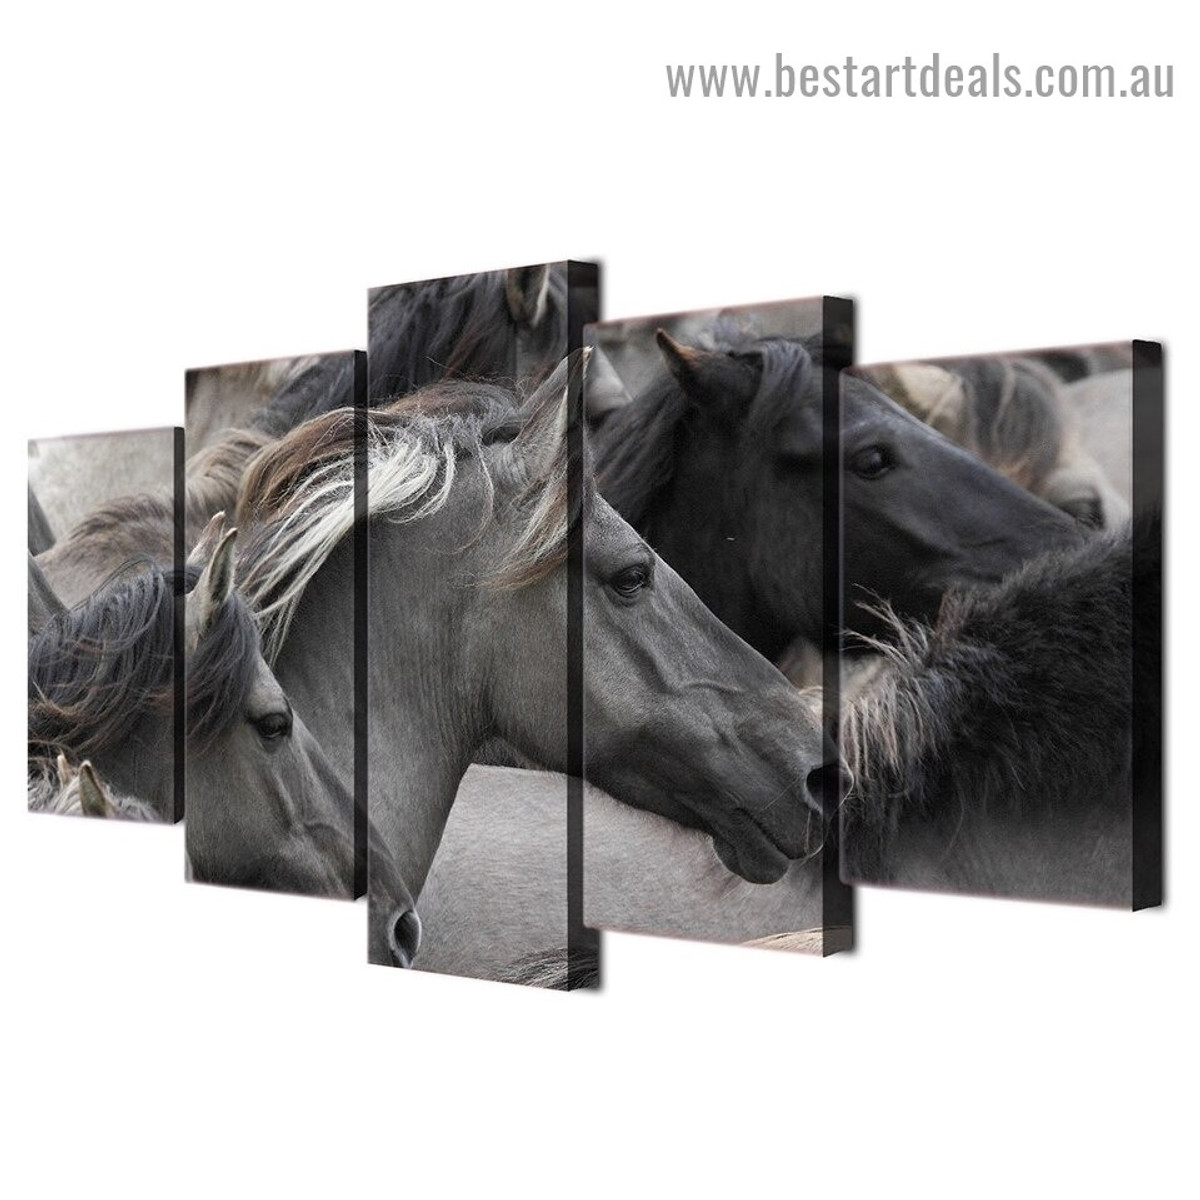 Galloping Horses Animal Modern Artwork Photo Canvas Print for Room Wall Adornment